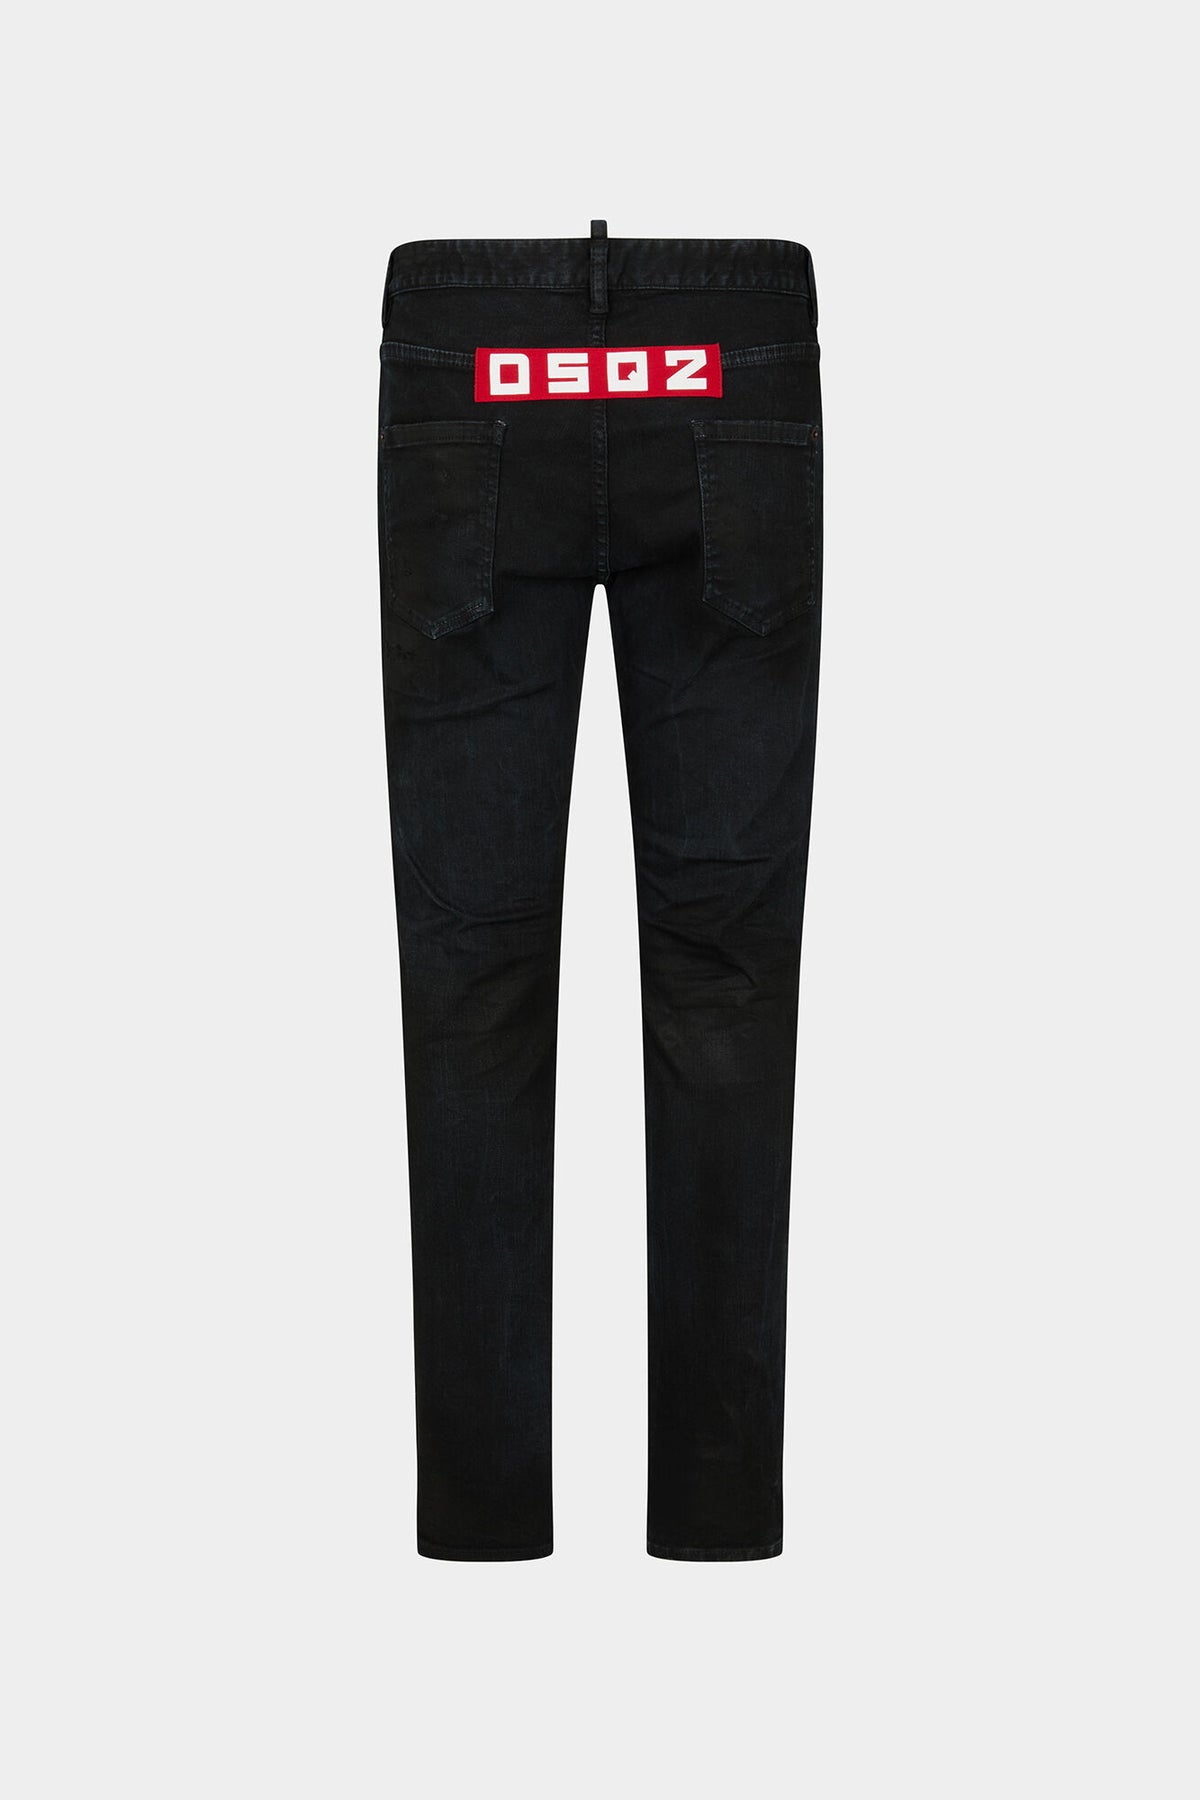 BLACK BULL RIPPED WASH COOL GUY JEANS